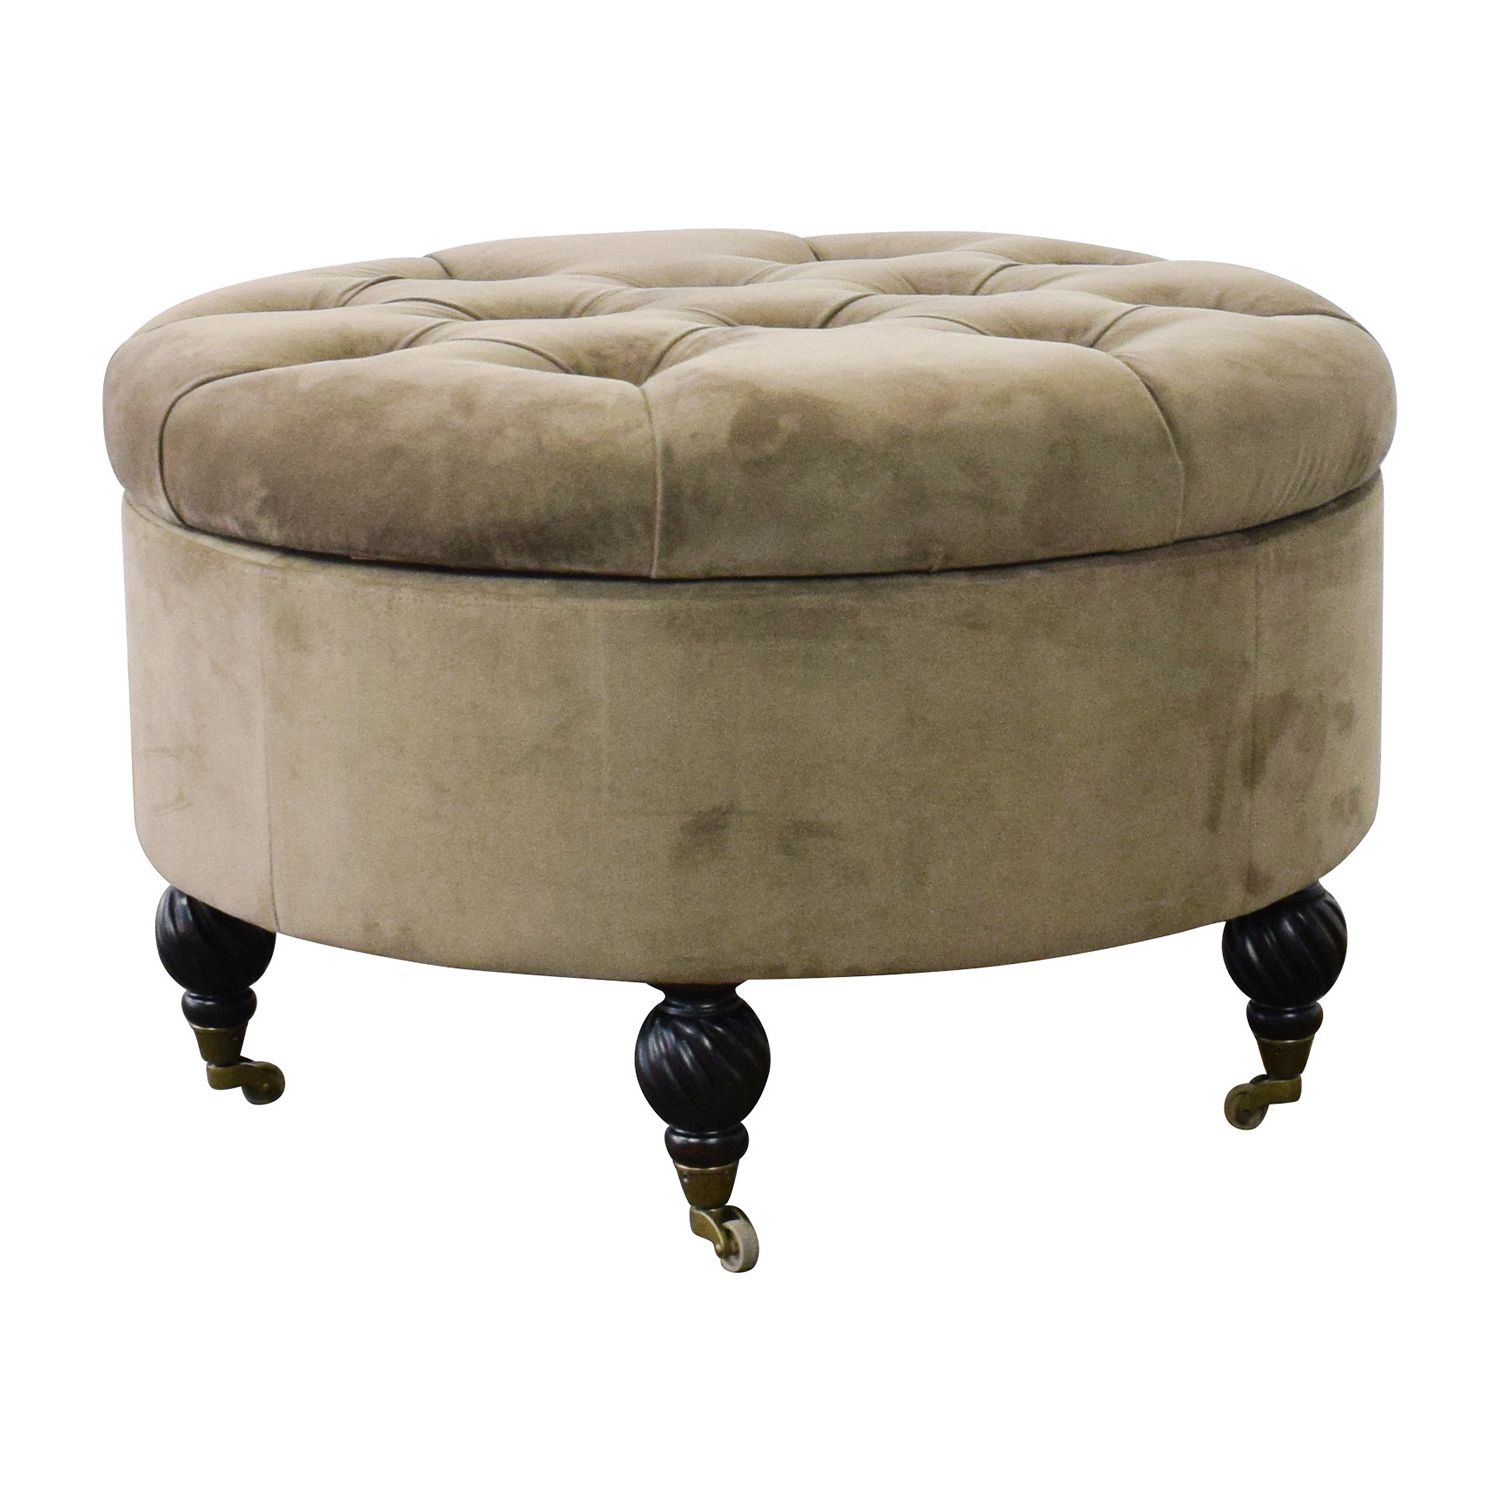 [%55% Off – Frontgate Frontgate Round Tufted Storage Ottoman / Storage In Well Known Fabric Tufted Round Storage Ottomans|fabric Tufted Round Storage Ottomans Pertaining To Trendy 55% Off – Frontgate Frontgate Round Tufted Storage Ottoman / Storage|well Liked Fabric Tufted Round Storage Ottomans For 55% Off – Frontgate Frontgate Round Tufted Storage Ottoman / Storage|most Popular 55% Off – Frontgate Frontgate Round Tufted Storage Ottoman / Storage In Fabric Tufted Round Storage Ottomans%] (View 1 of 10)